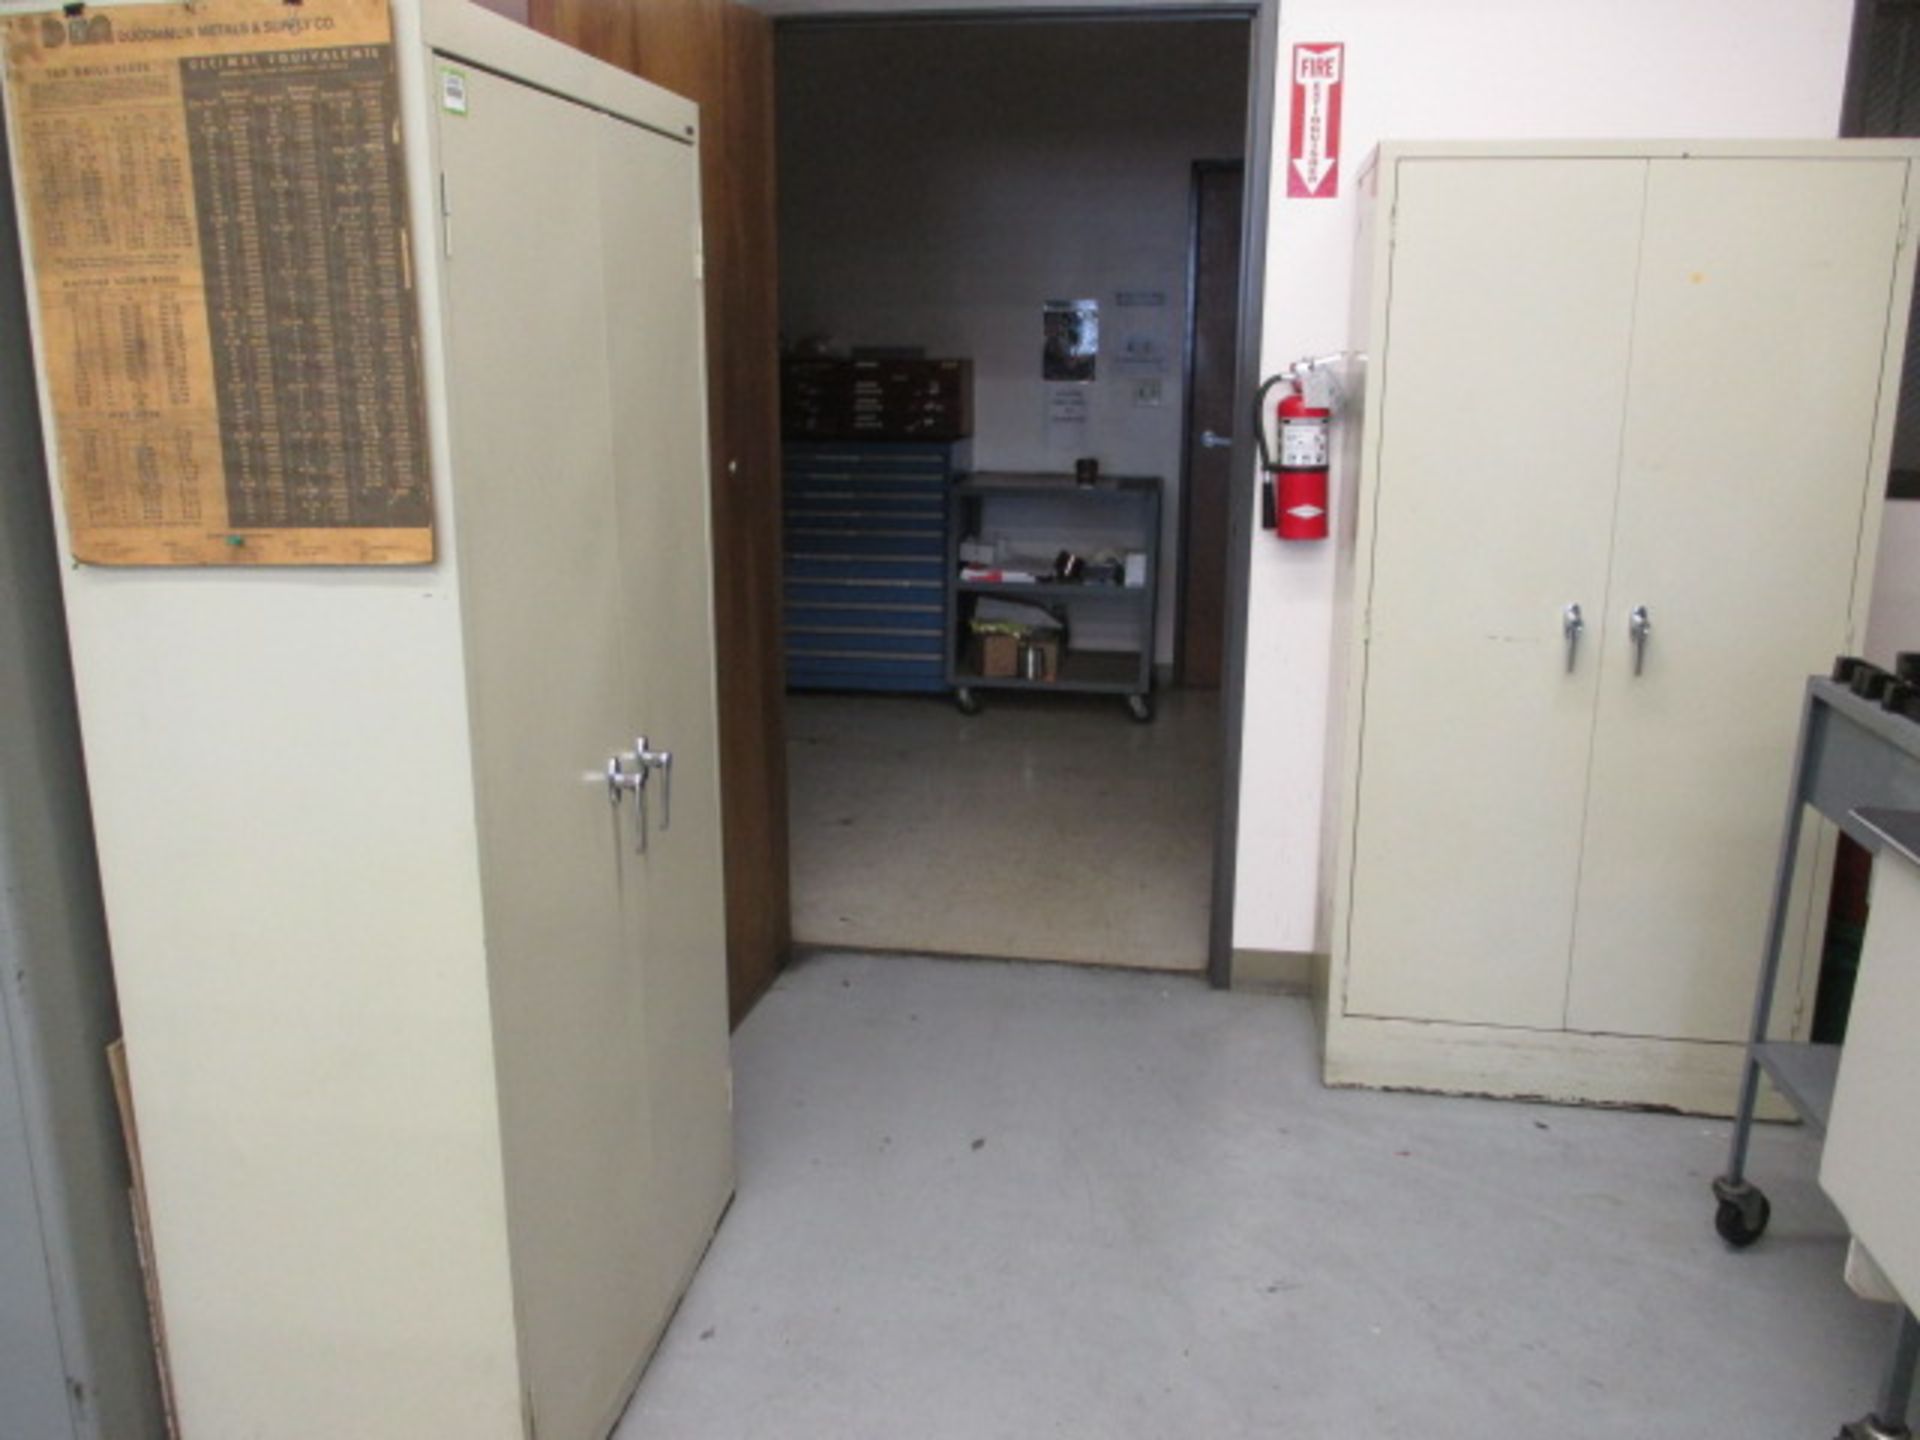 Cabinets with Contents. Lot: (2) Storage Cabinets with Misc Tooling. HIT# 2205831. CNC Room. Asset